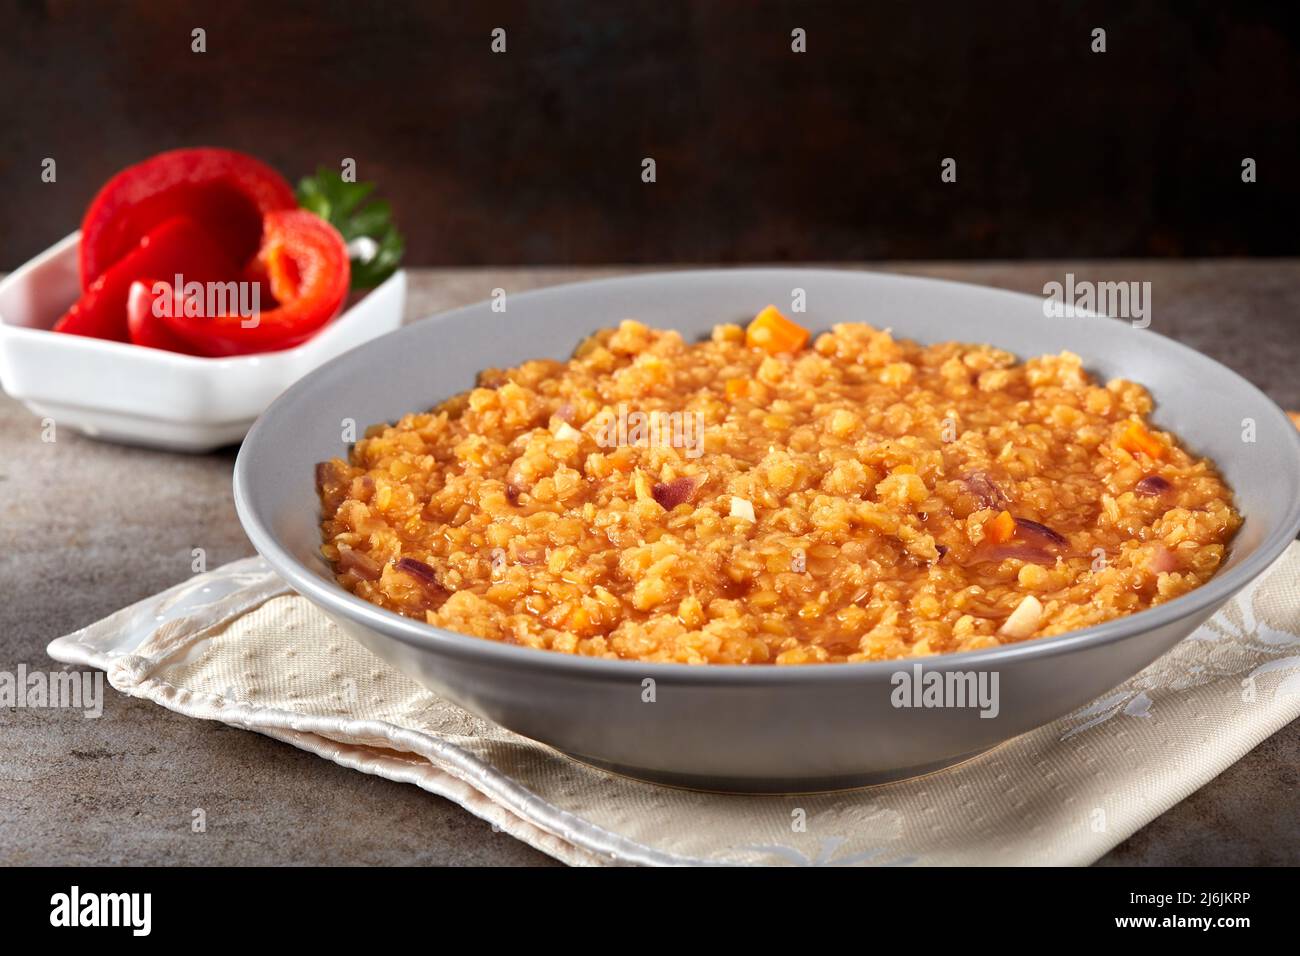 Lentil stew with onion and tomato sauce and pickles in background Stock Photo